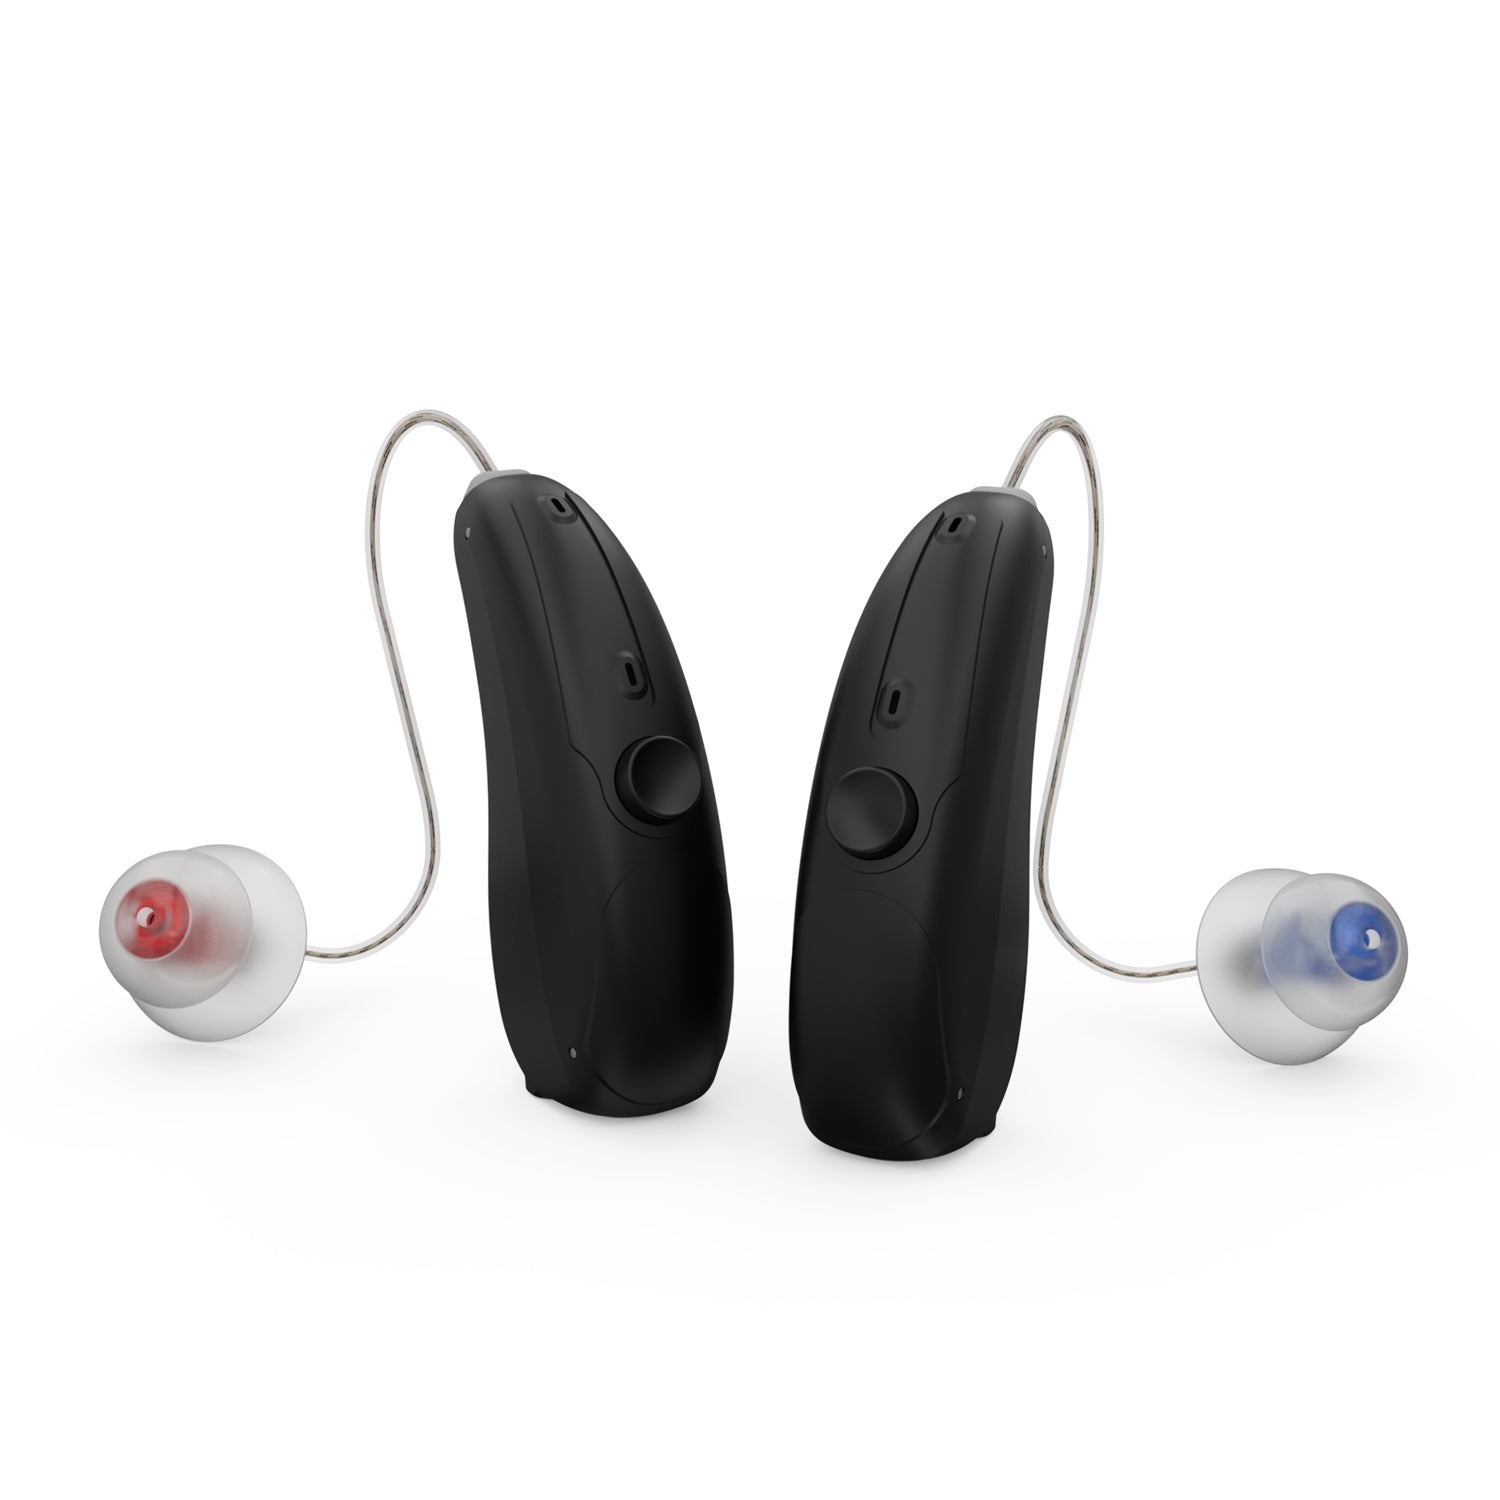 Soundbright Discovery behind-the-ear hearing aids